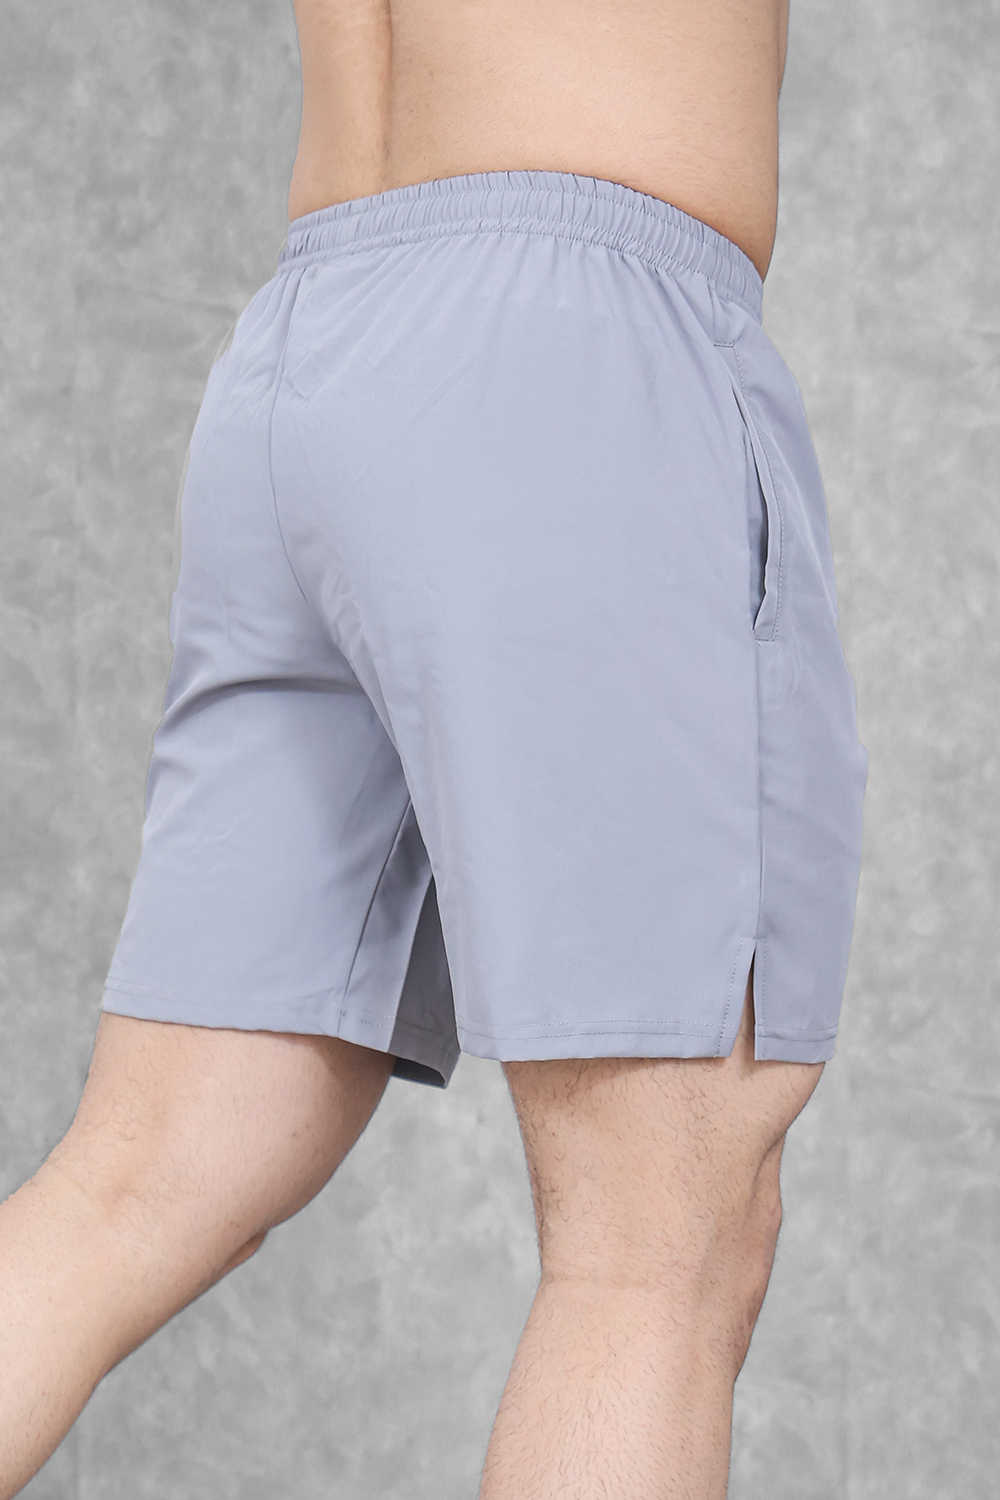 Dry-Fit Woven shorts- Grey